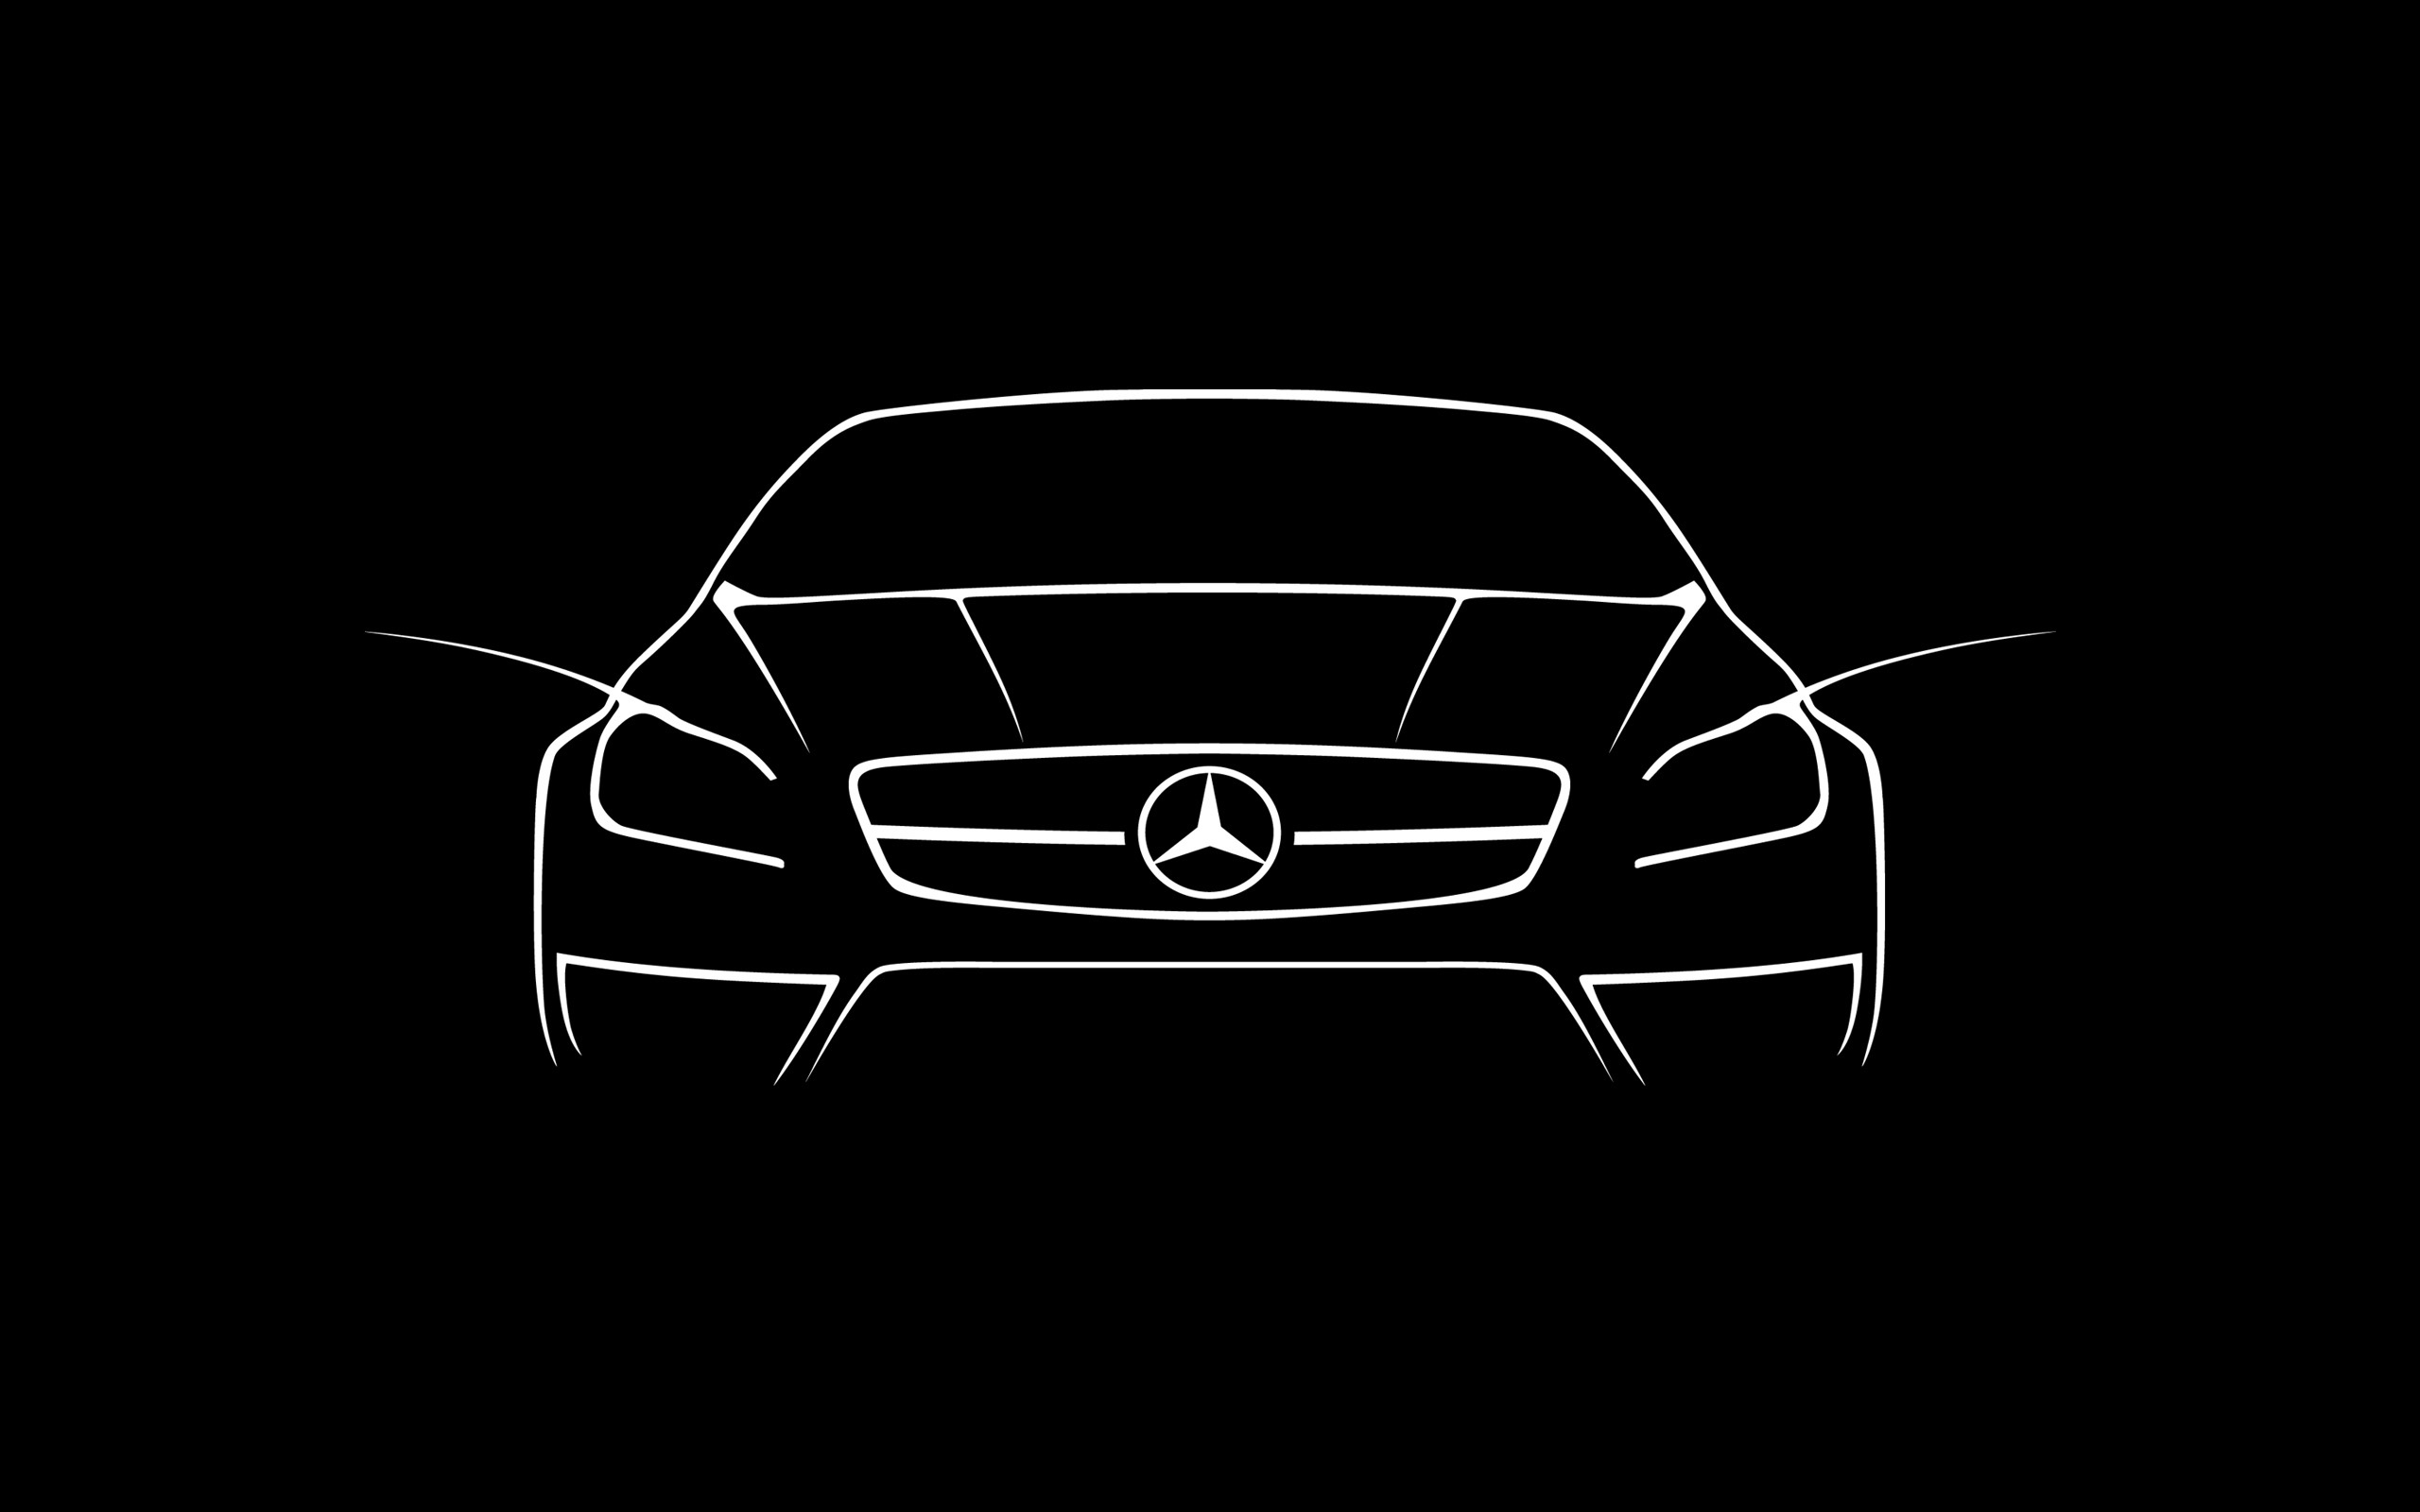 Desktop Wallpapers Mercedes-Benz silhouettes cls 63 amg Cars Black